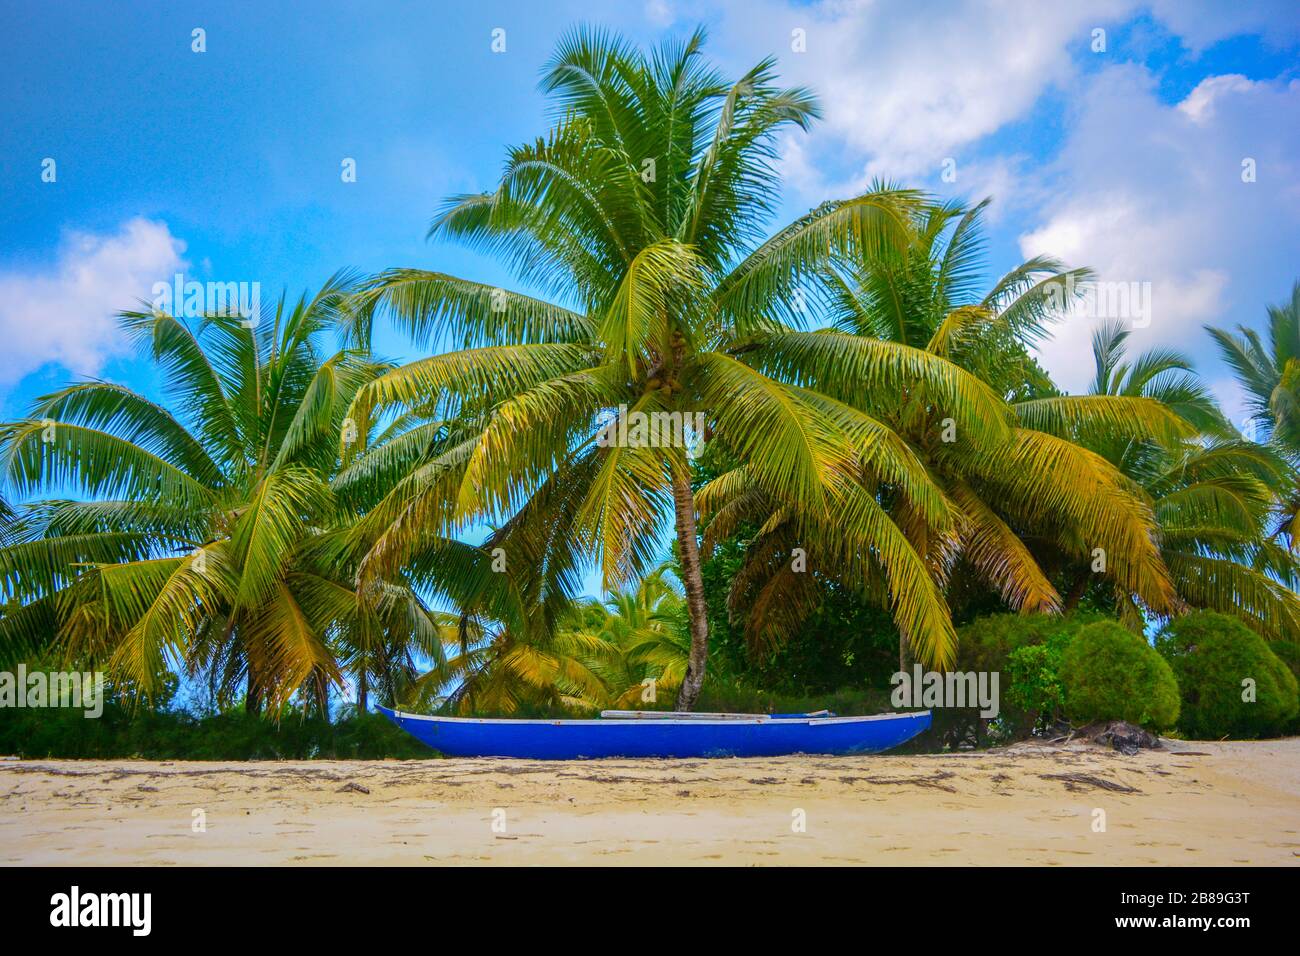 Wonderful scene of tropical paradise: white sand beach, blue wooden pirogue and in the back rich, lushy palm trees under a blue sky. Exotic nature Stock Photo